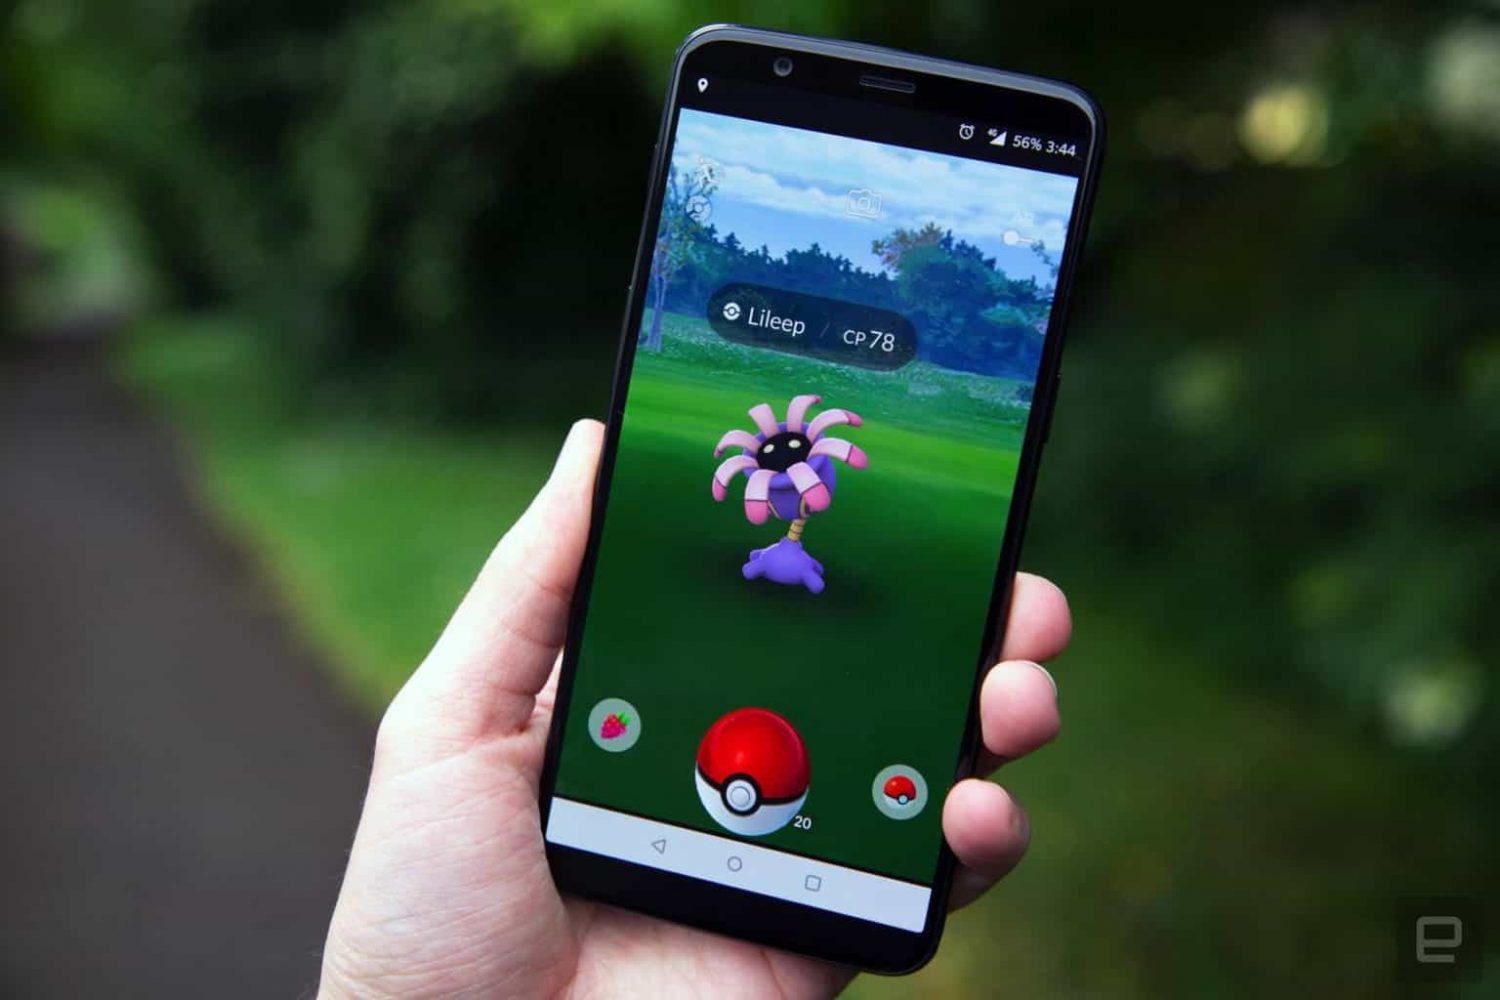 Pokemon Go used Augmented Reality to enrich the gaming experience